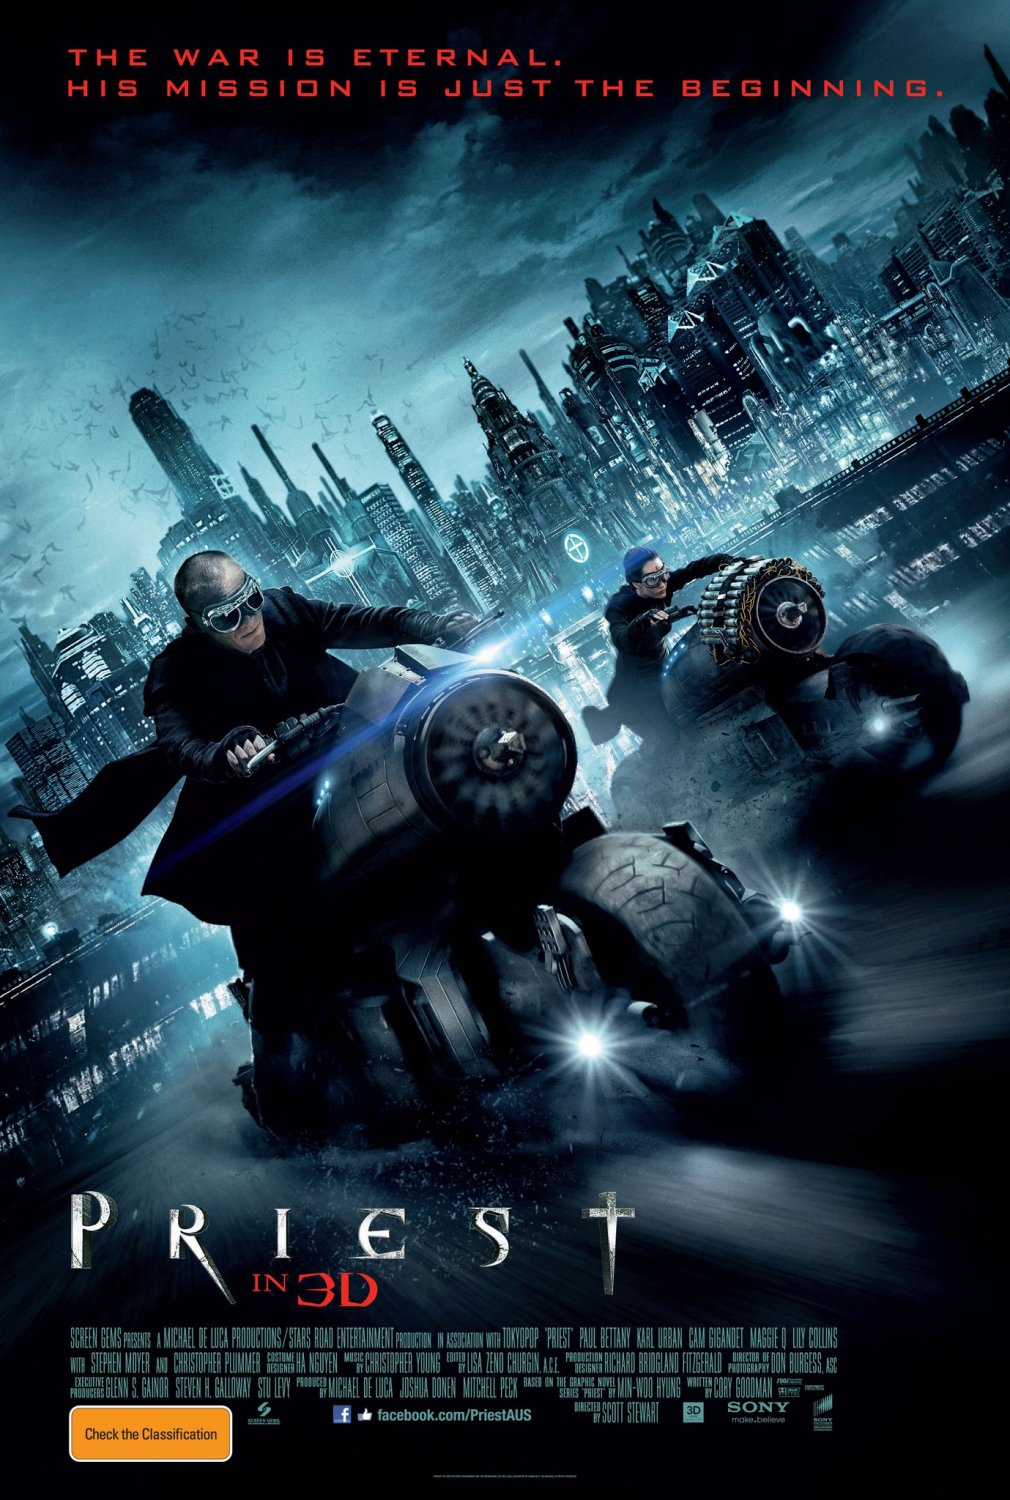 Extra Large Movie Poster Image for Priest (#10 of 10)